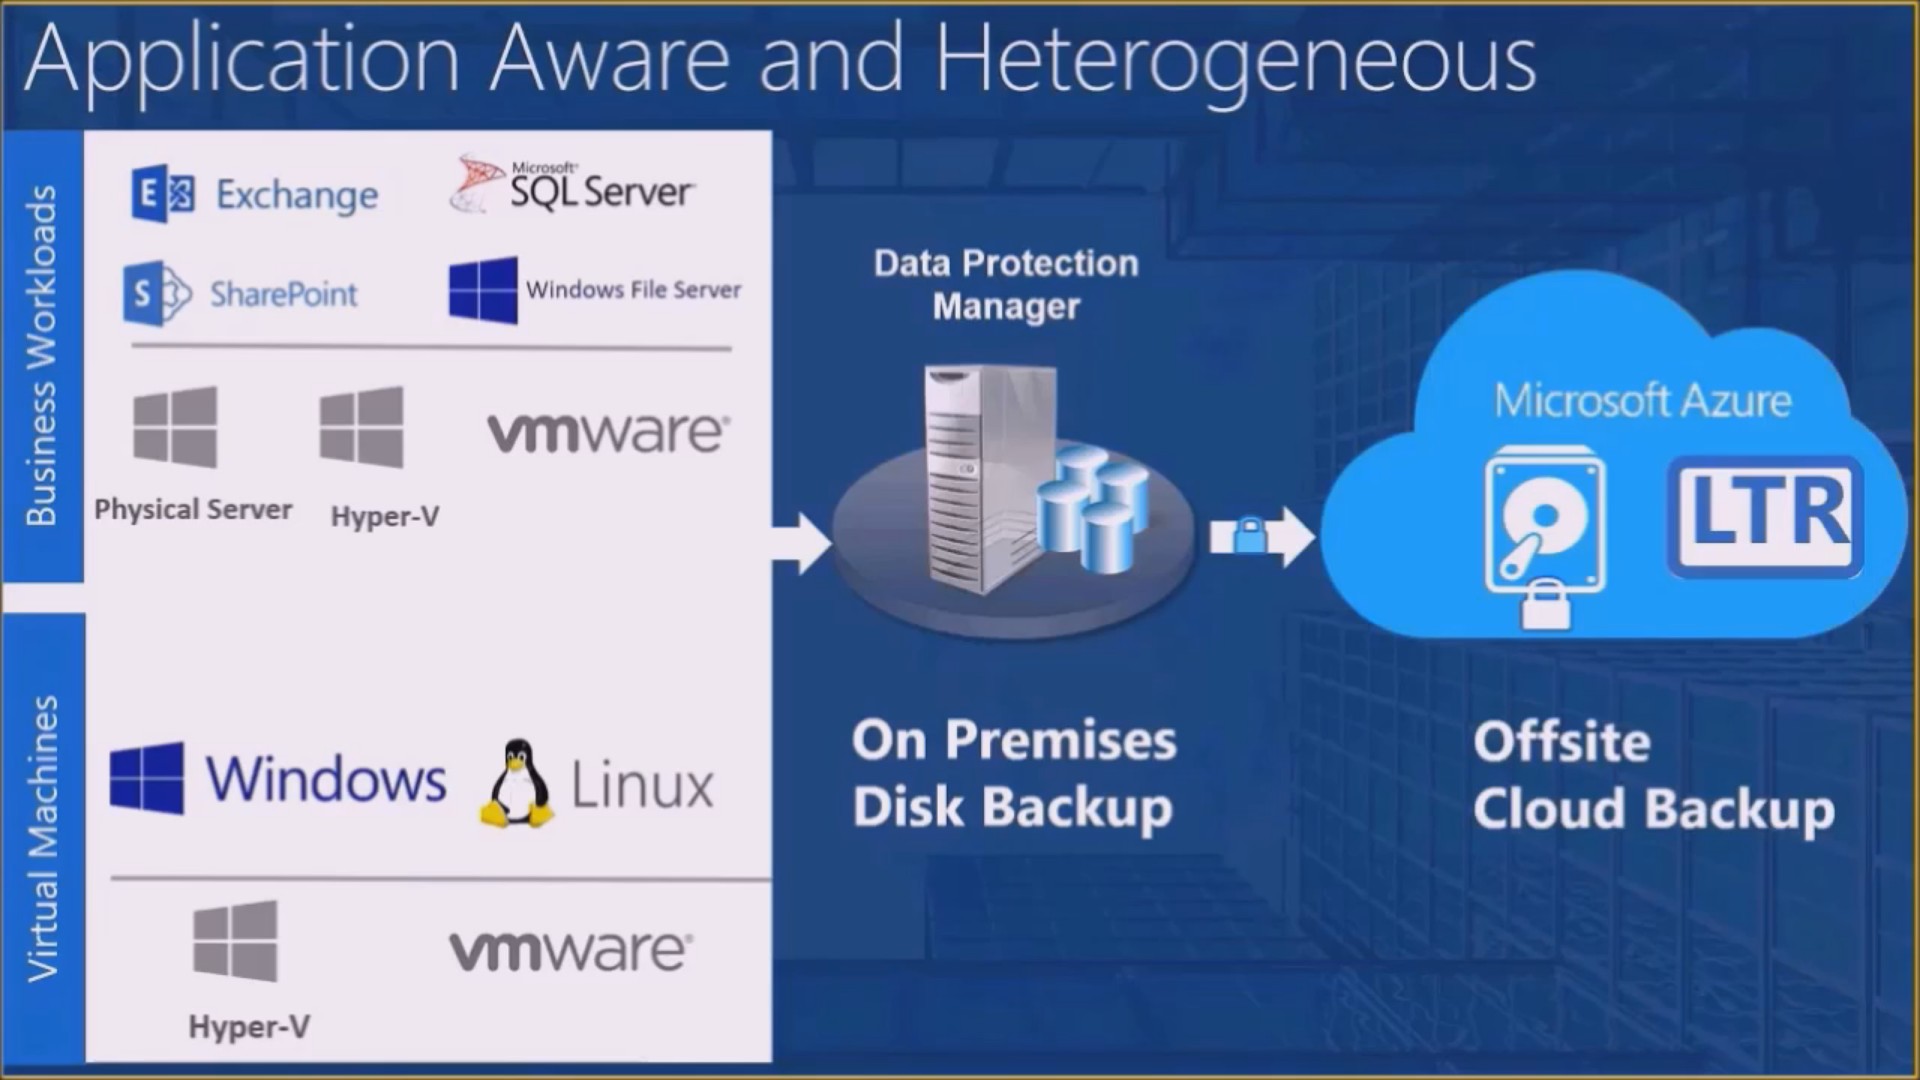 The DPM solution now includes VMware virtual machines [Image Credit: Microsoft]